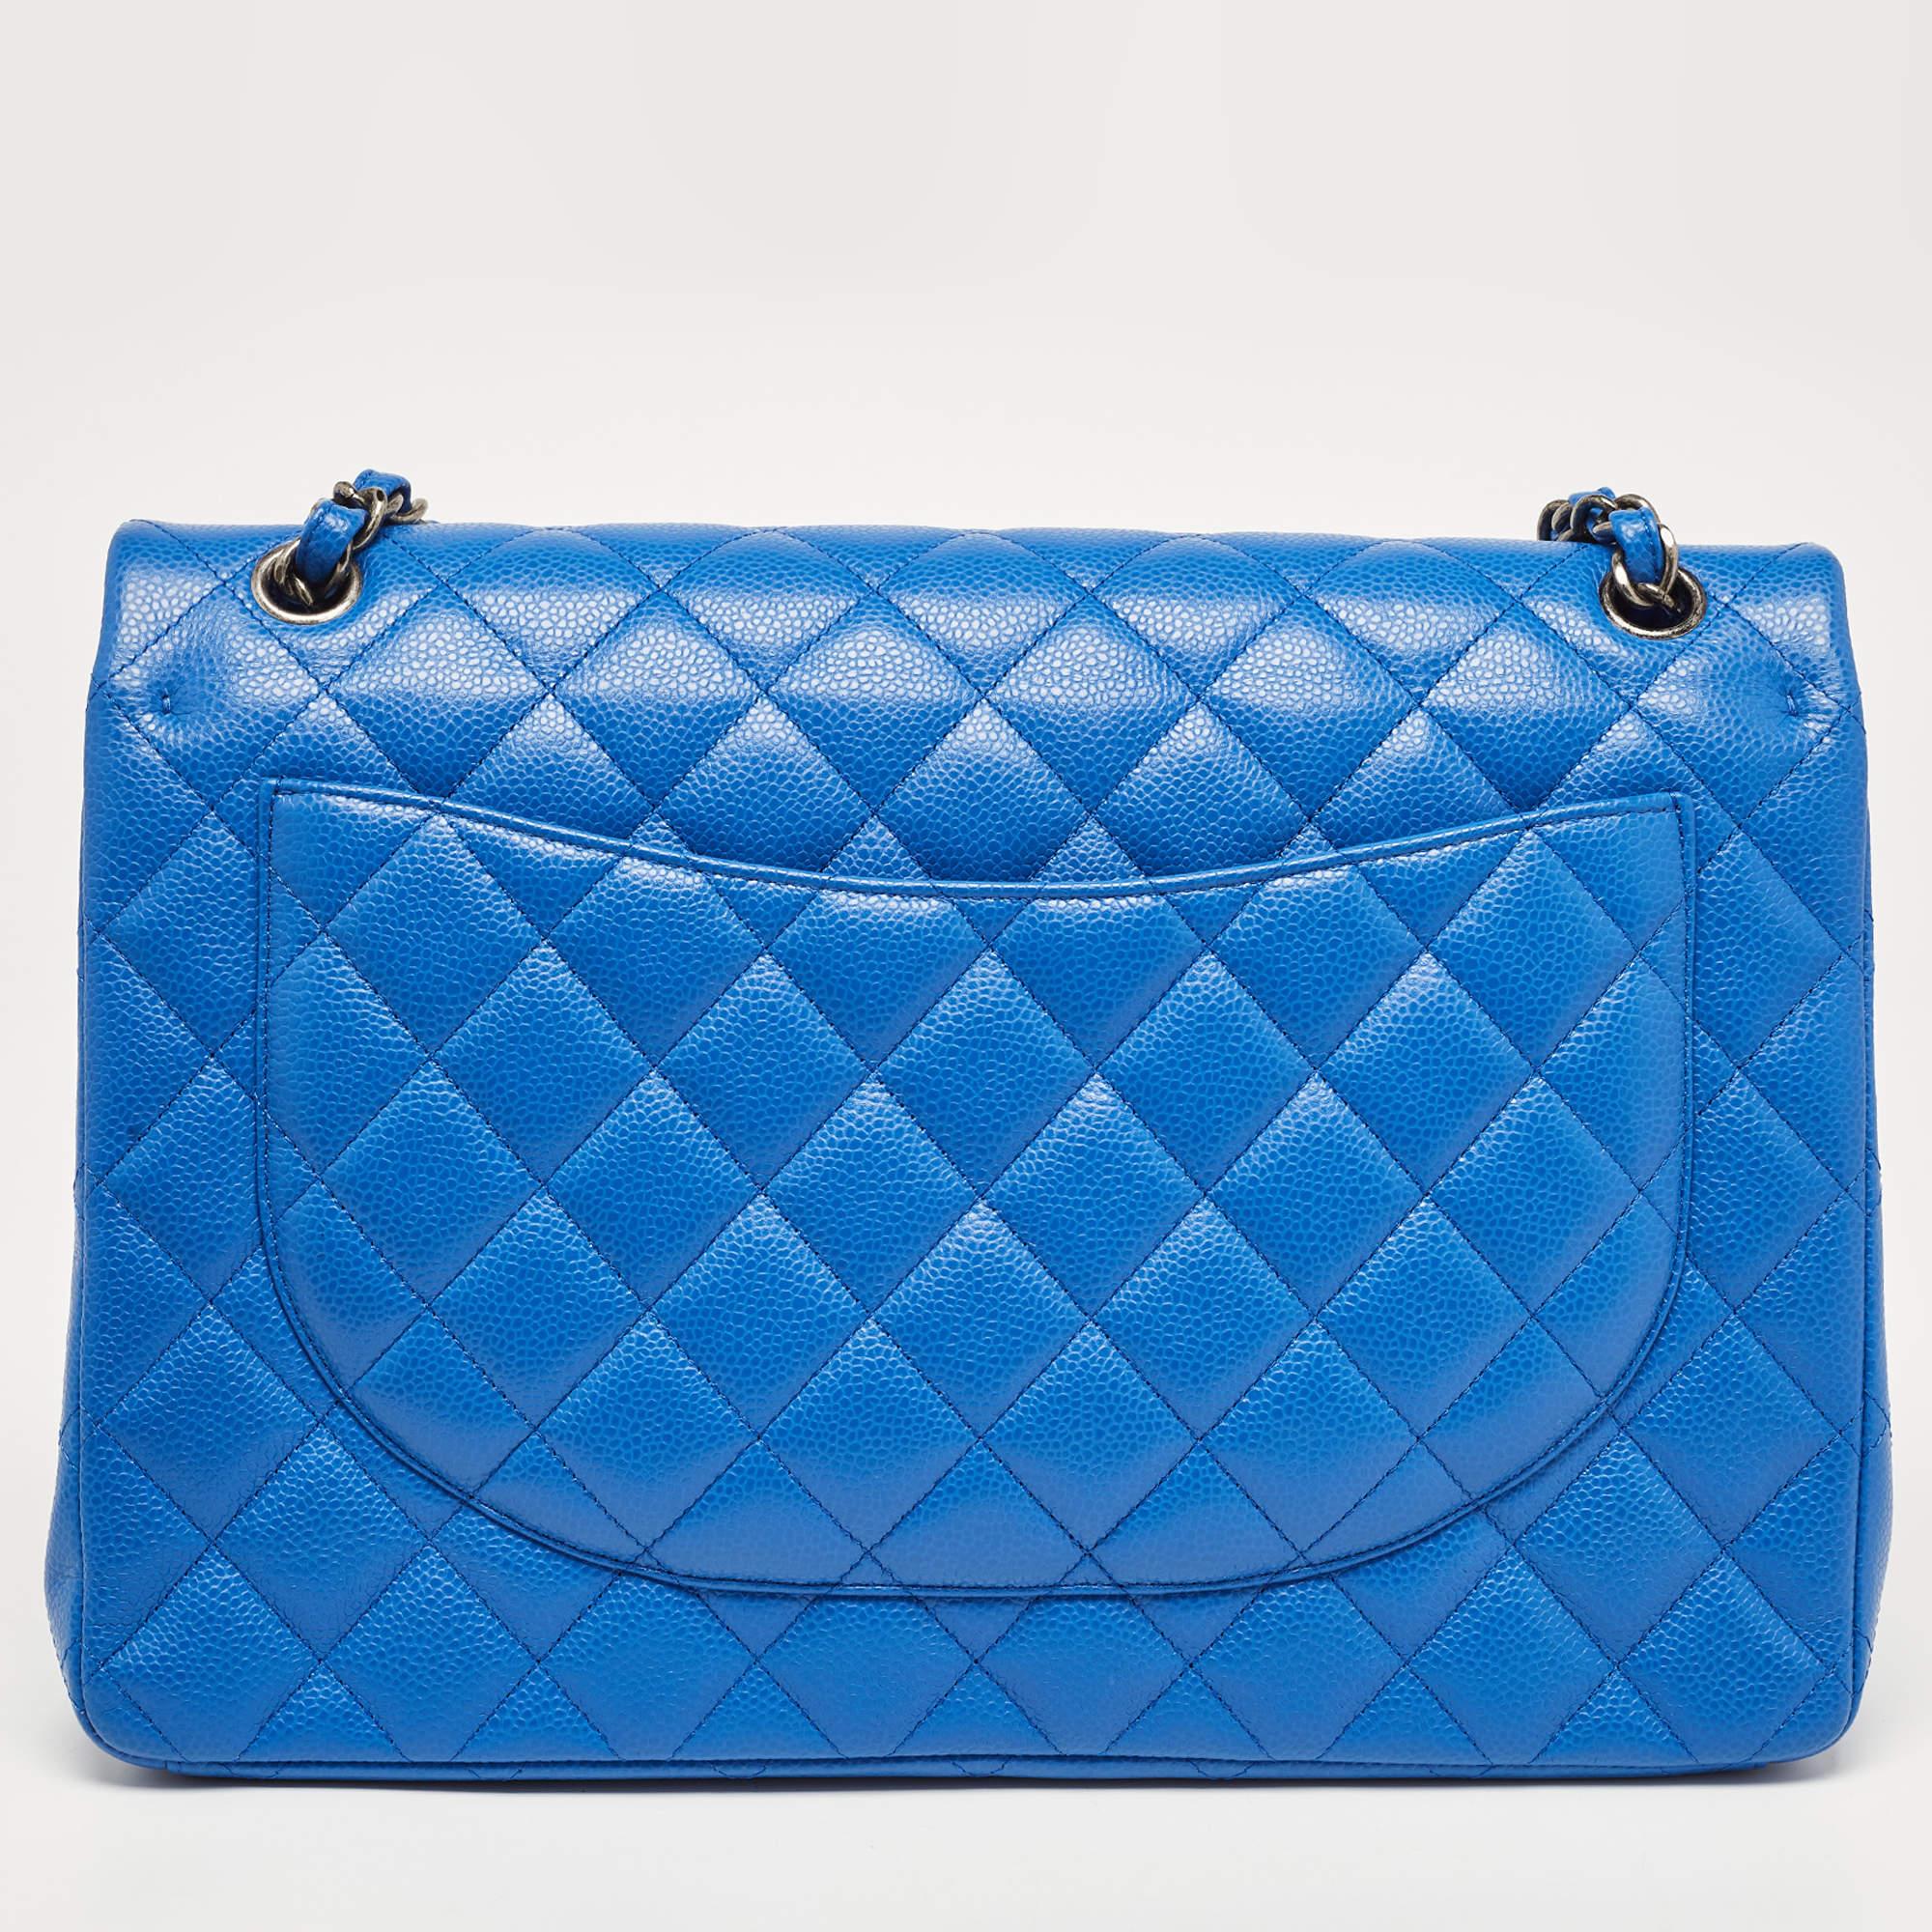 Chanel Blue Quilted Caviar Leather Maxi Classic Double Flap Bag 6